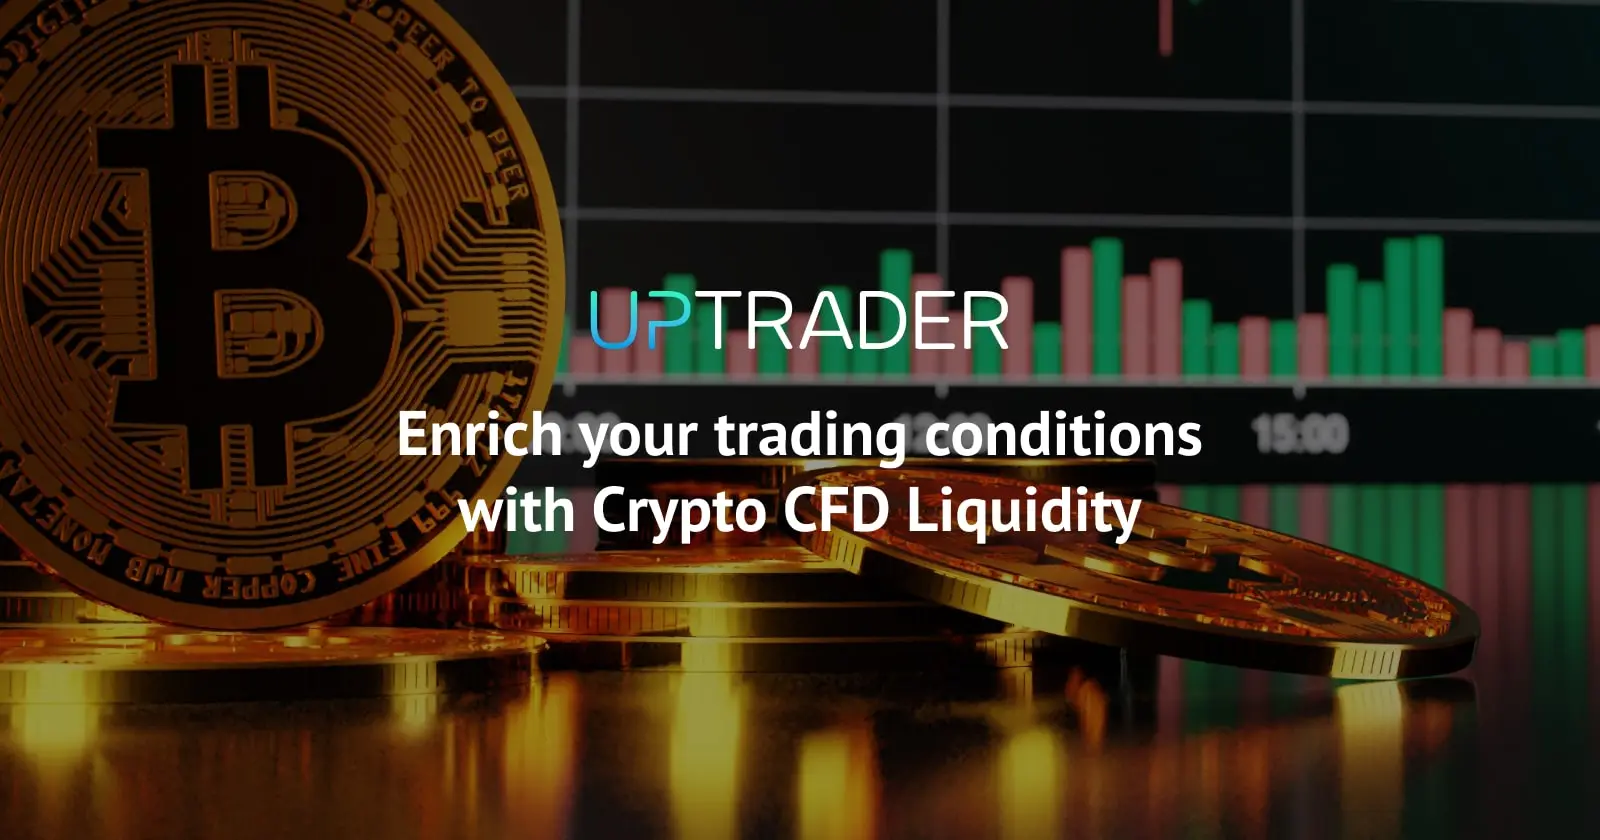 Enrich your trading conditions with Crypto CFD Liquidity